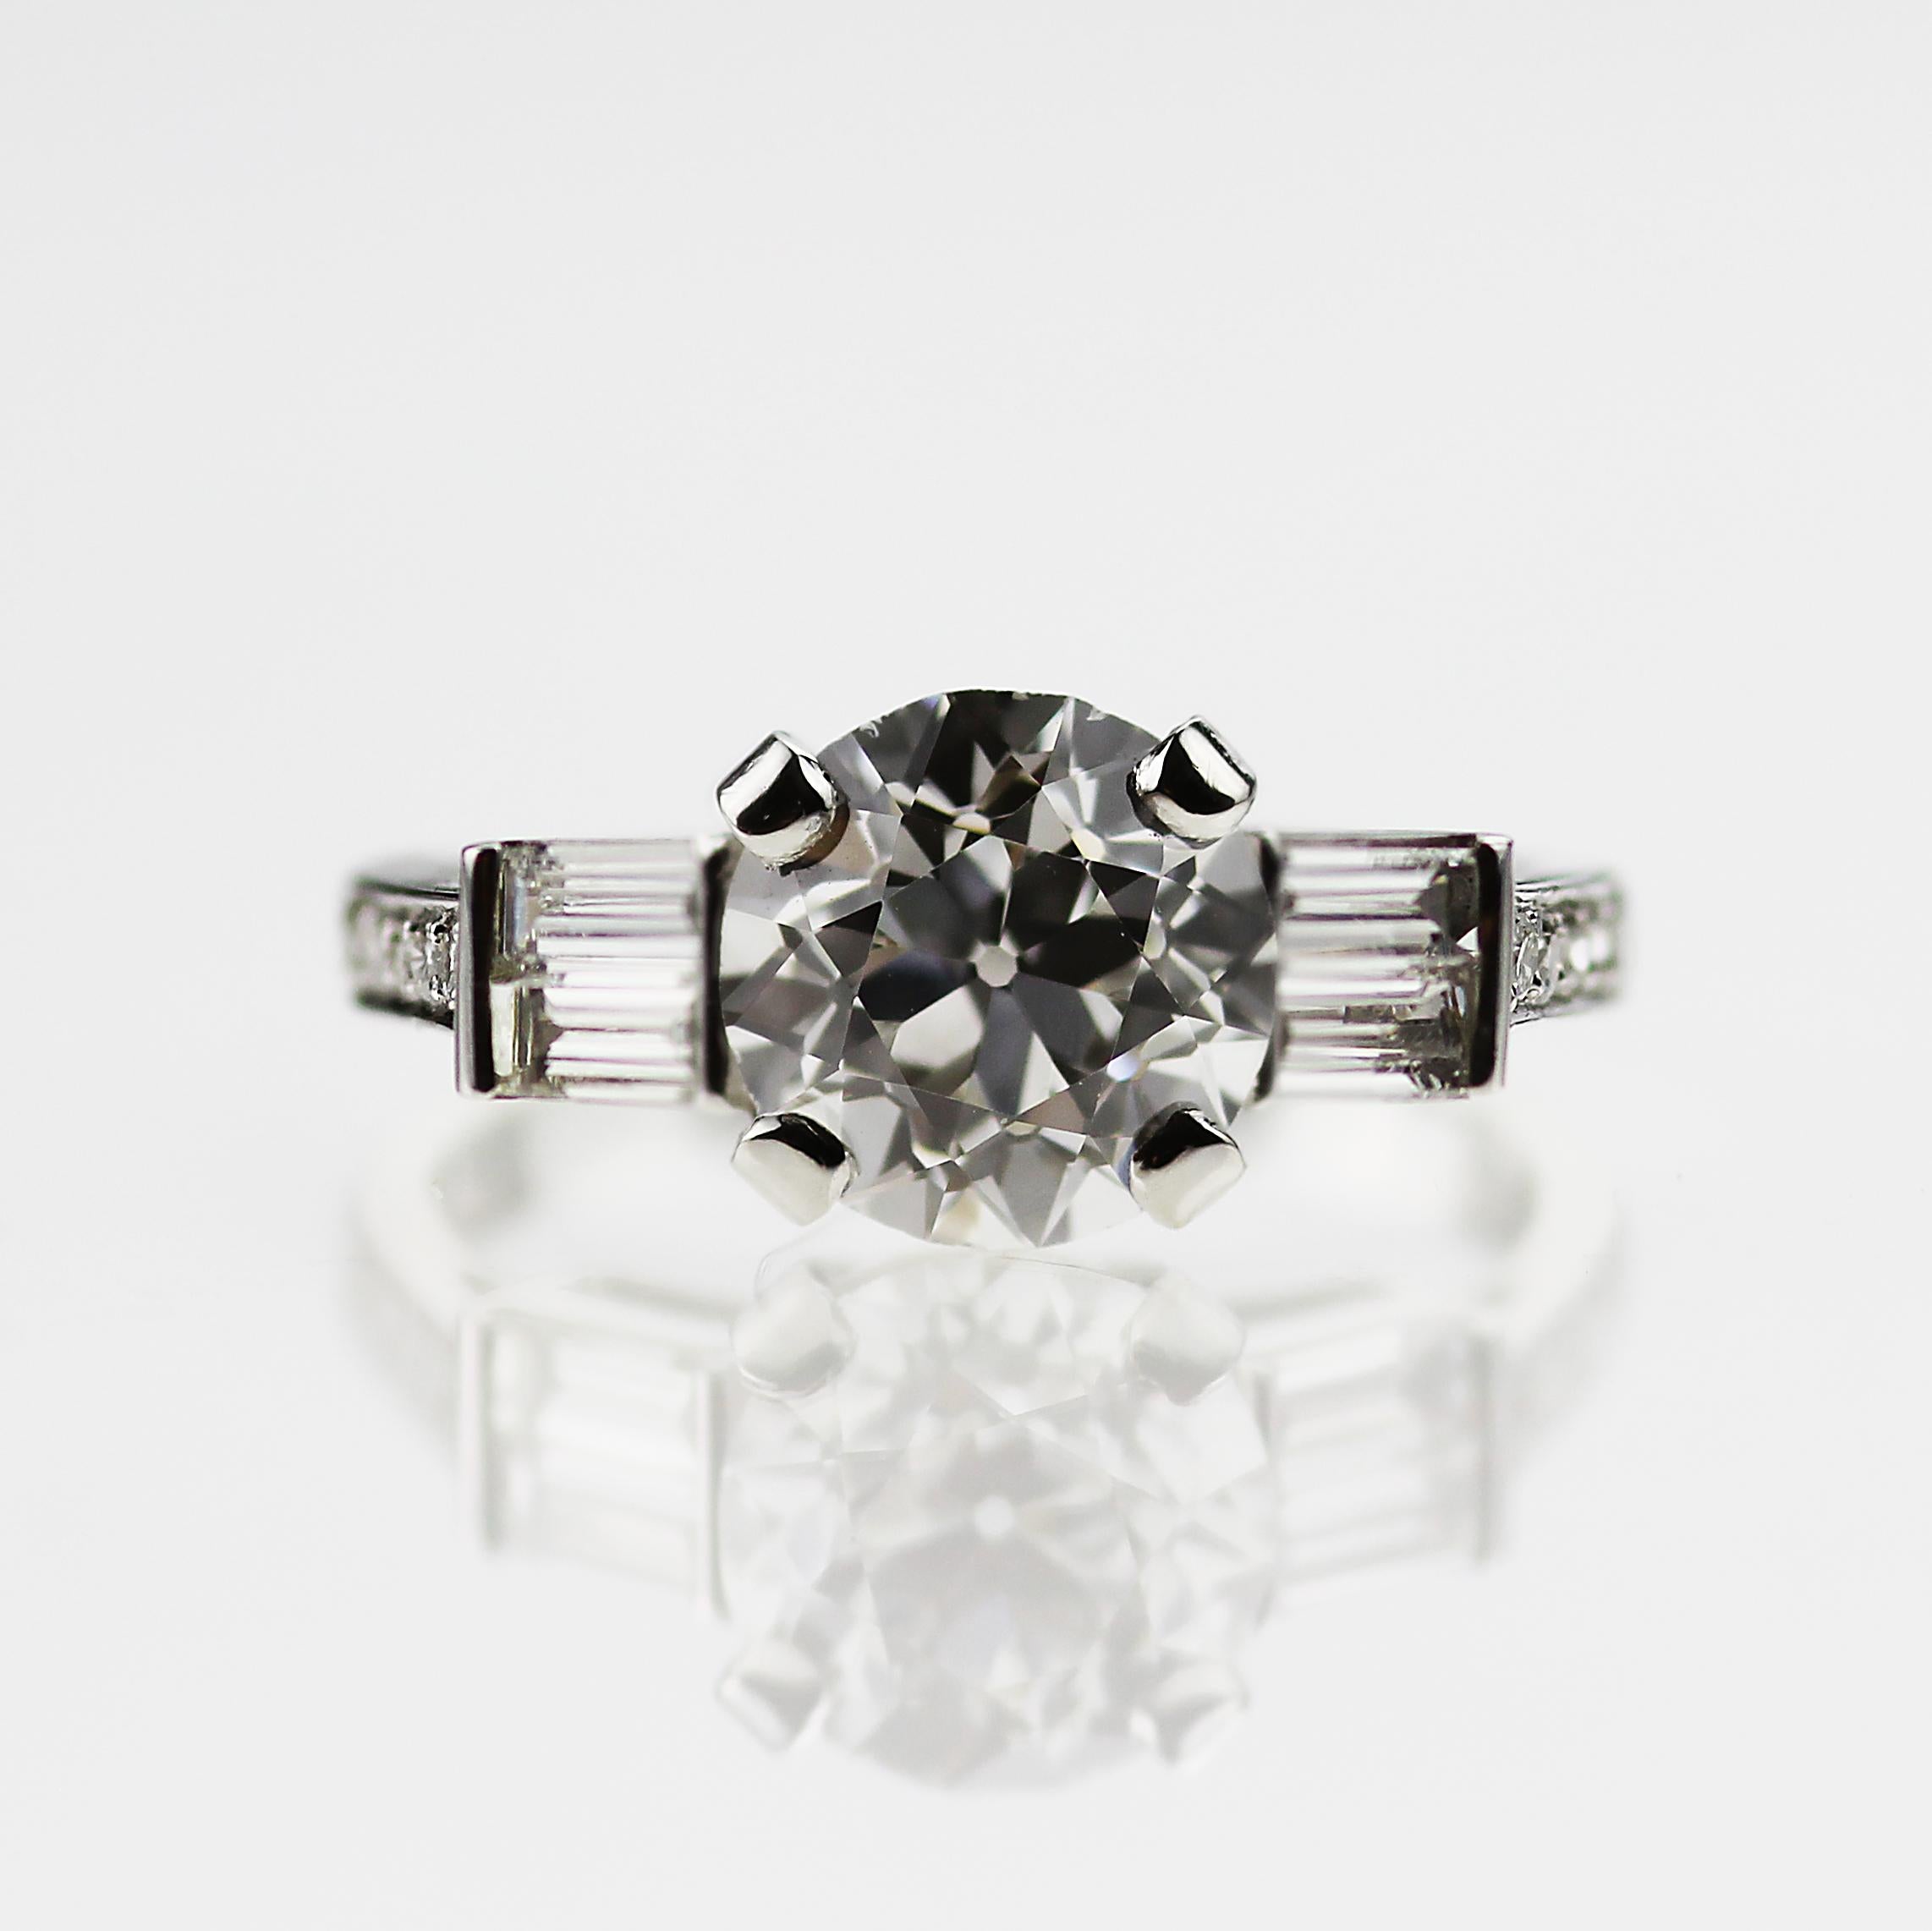 An elegant platinum and diamond solitaire ring with baguette diamond shoulders. The Old European cut diamond dates to c.1910 and has been reset in a modern ring mount, adding a contemporary touch to a classic. The platinum band is stamped with